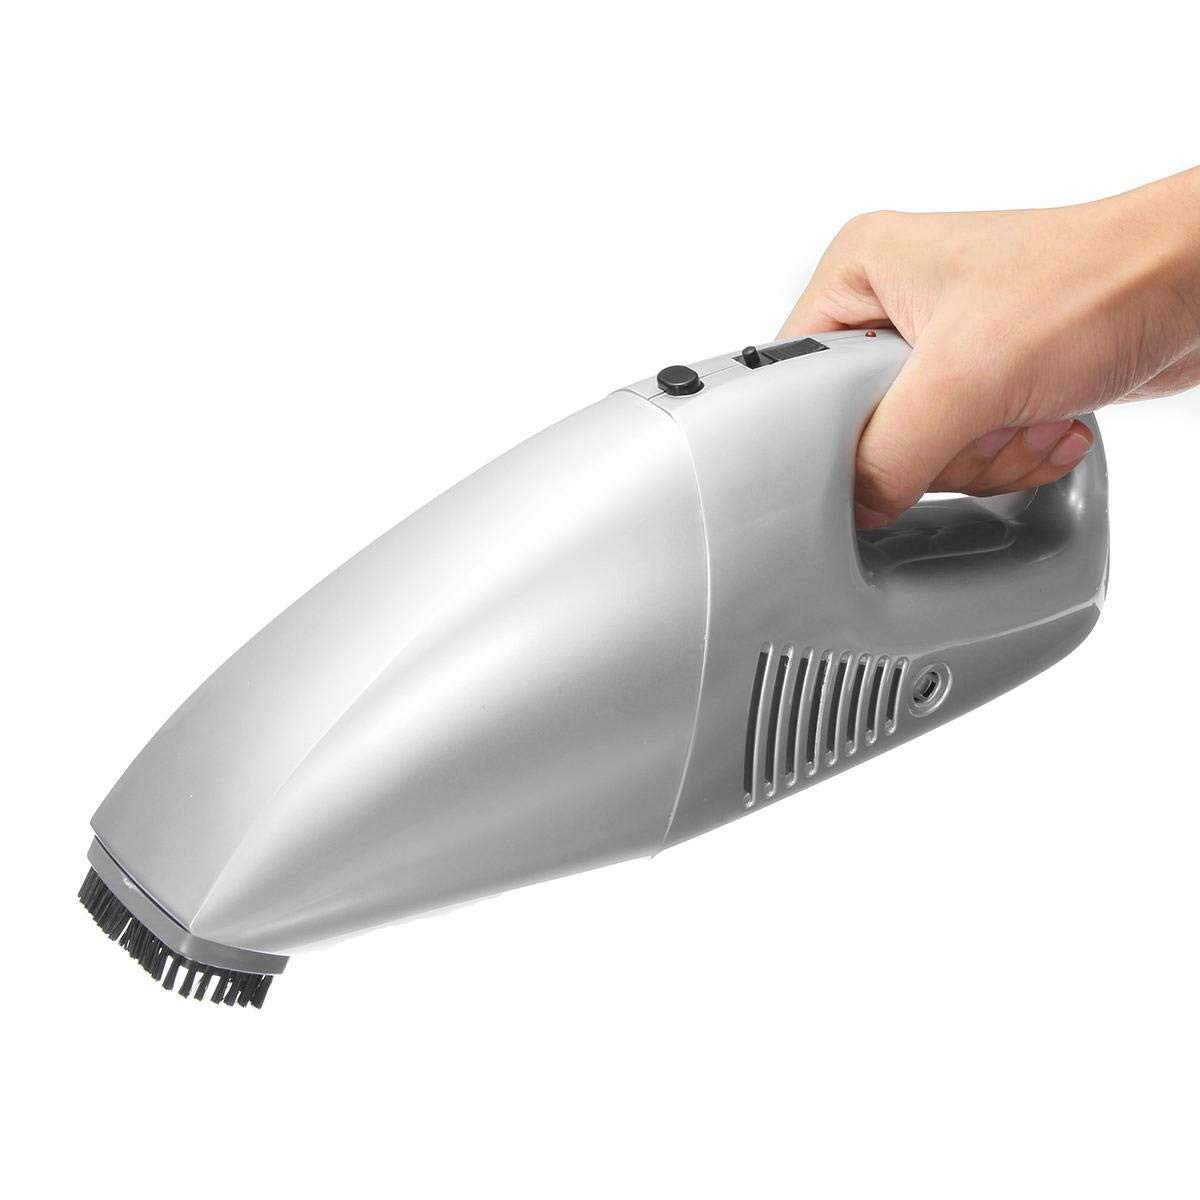 Portable Handheld Rechargeable Cordless Vacuum Cleaner Car Vehicle Home Office - Car Electronics Car